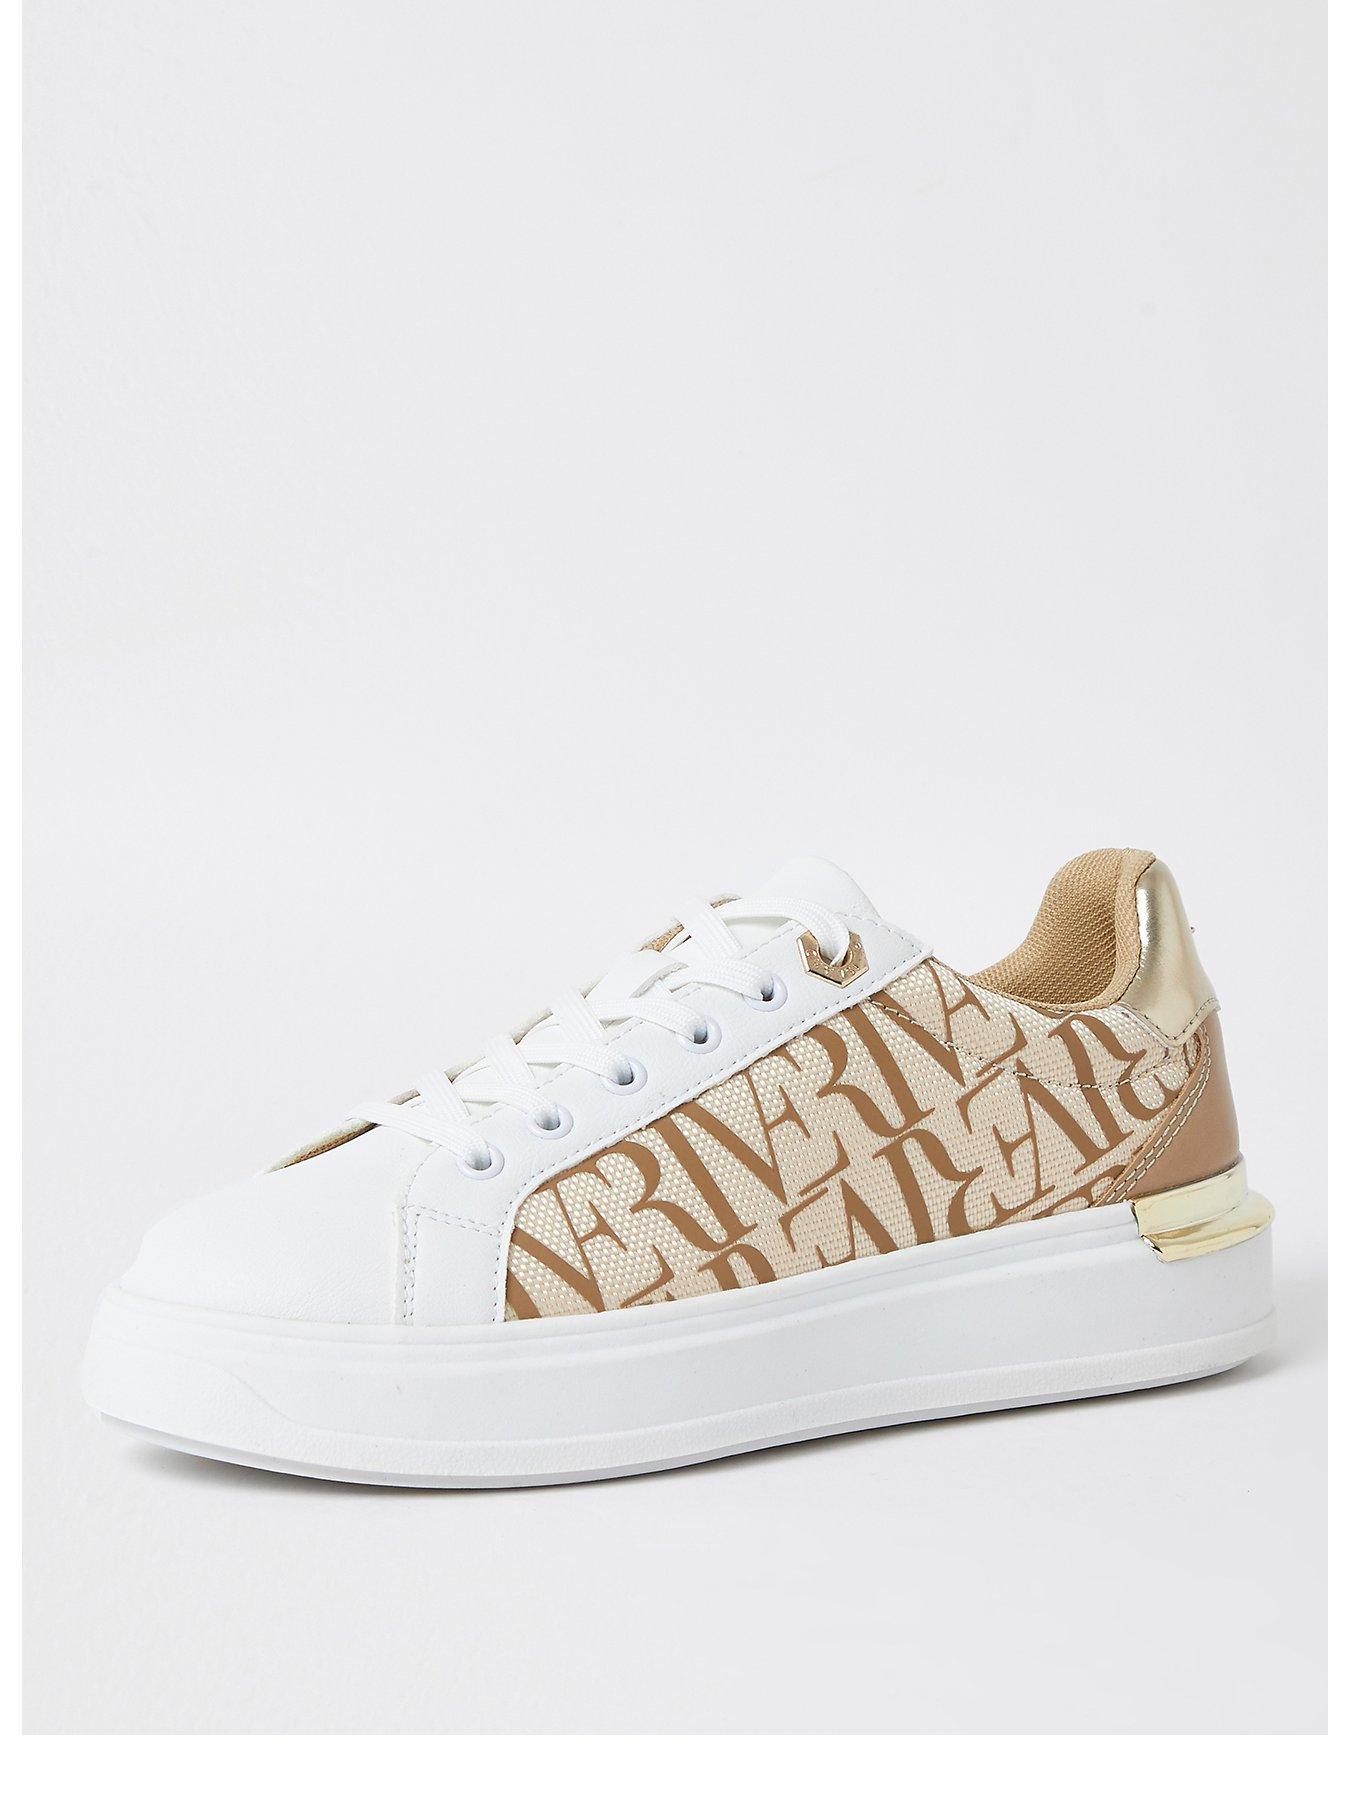 river island sparkly trainers